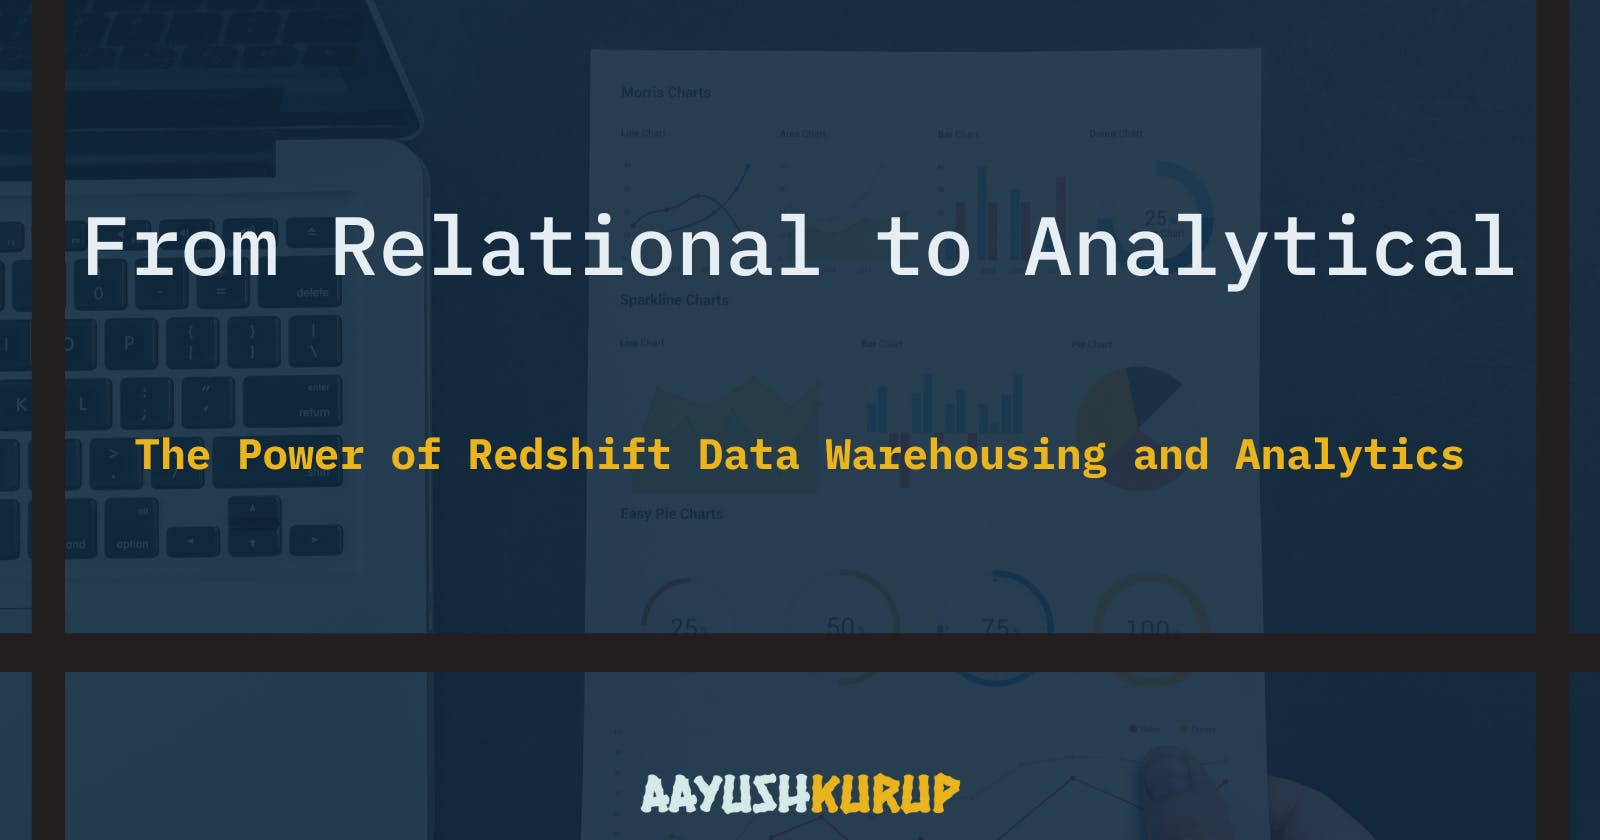 From Relational to Analytical: The Power of Redshift Data Warehousing and Analytics